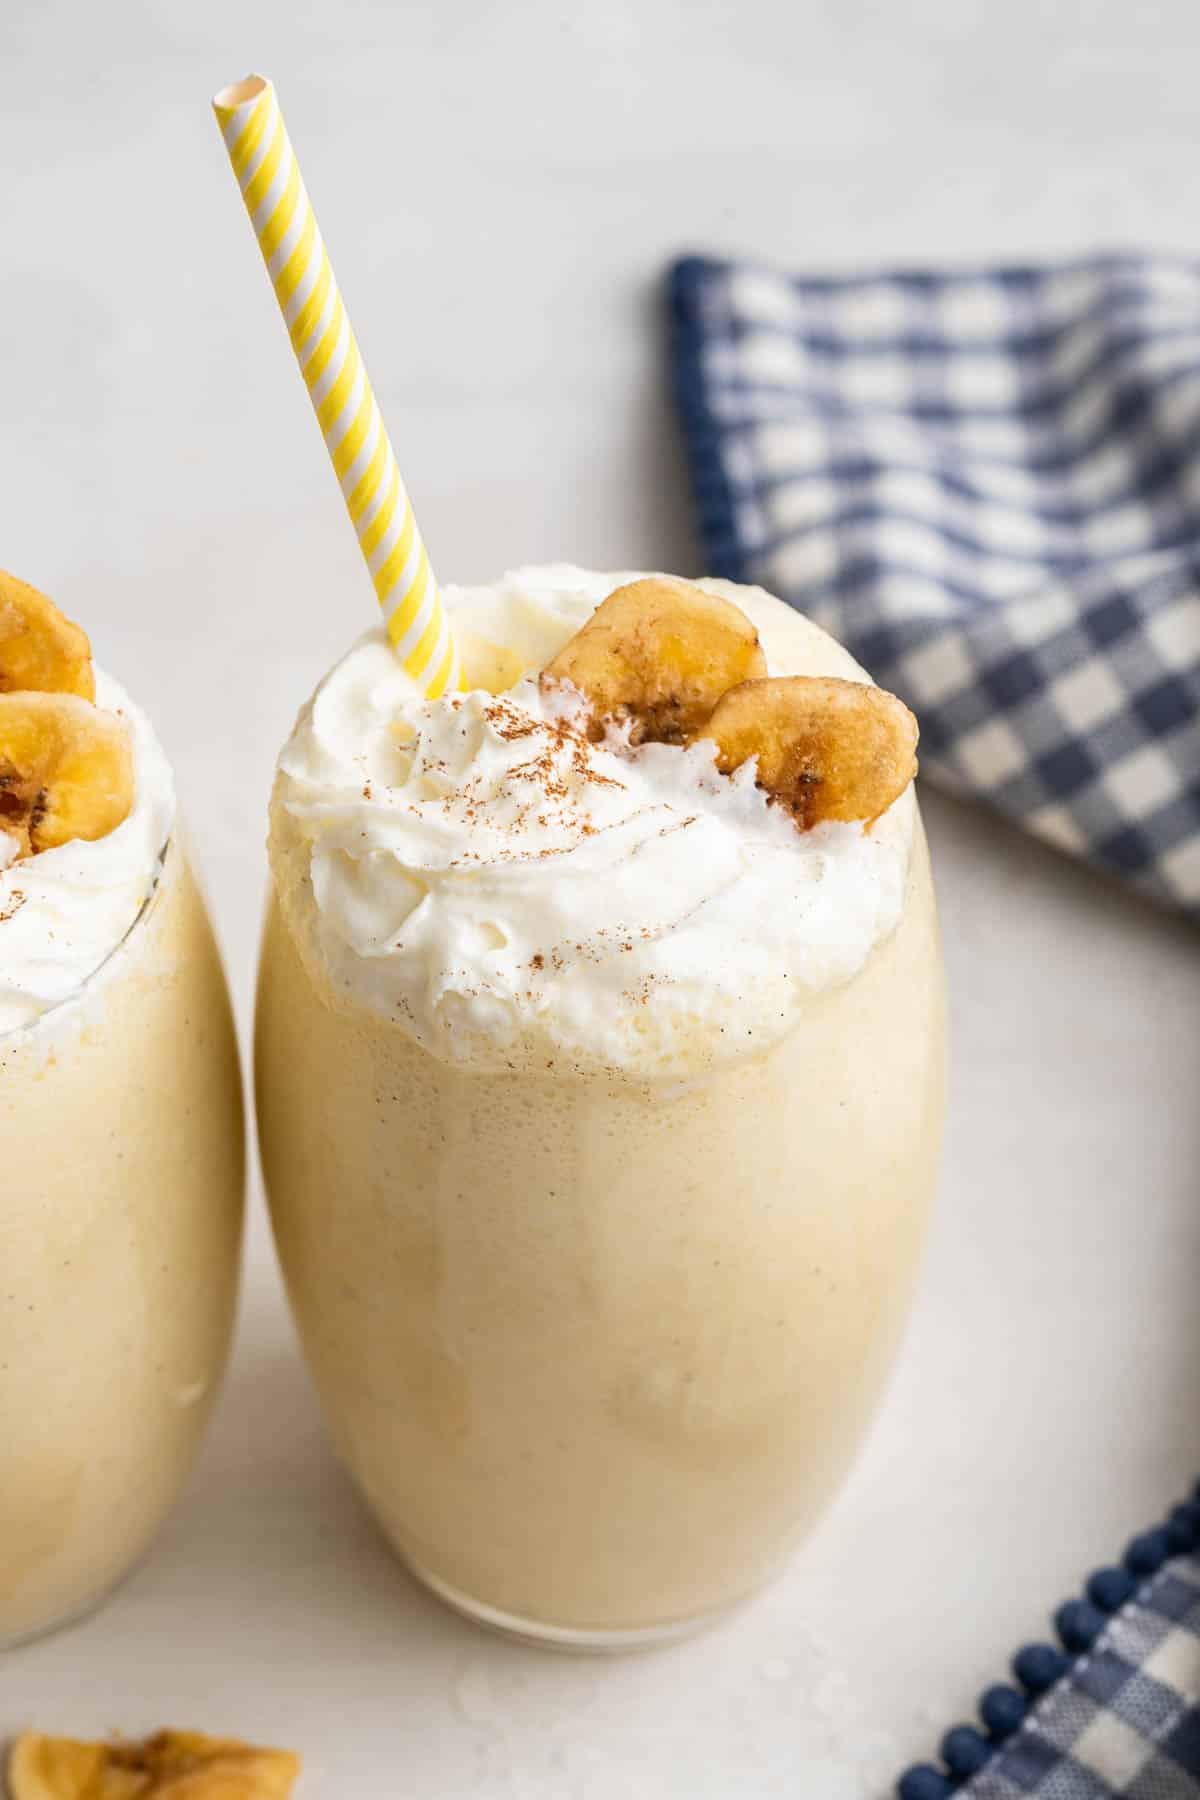 Overhead shot of two banana milkshakes garnished with whipped cream, banana chips and a straw.